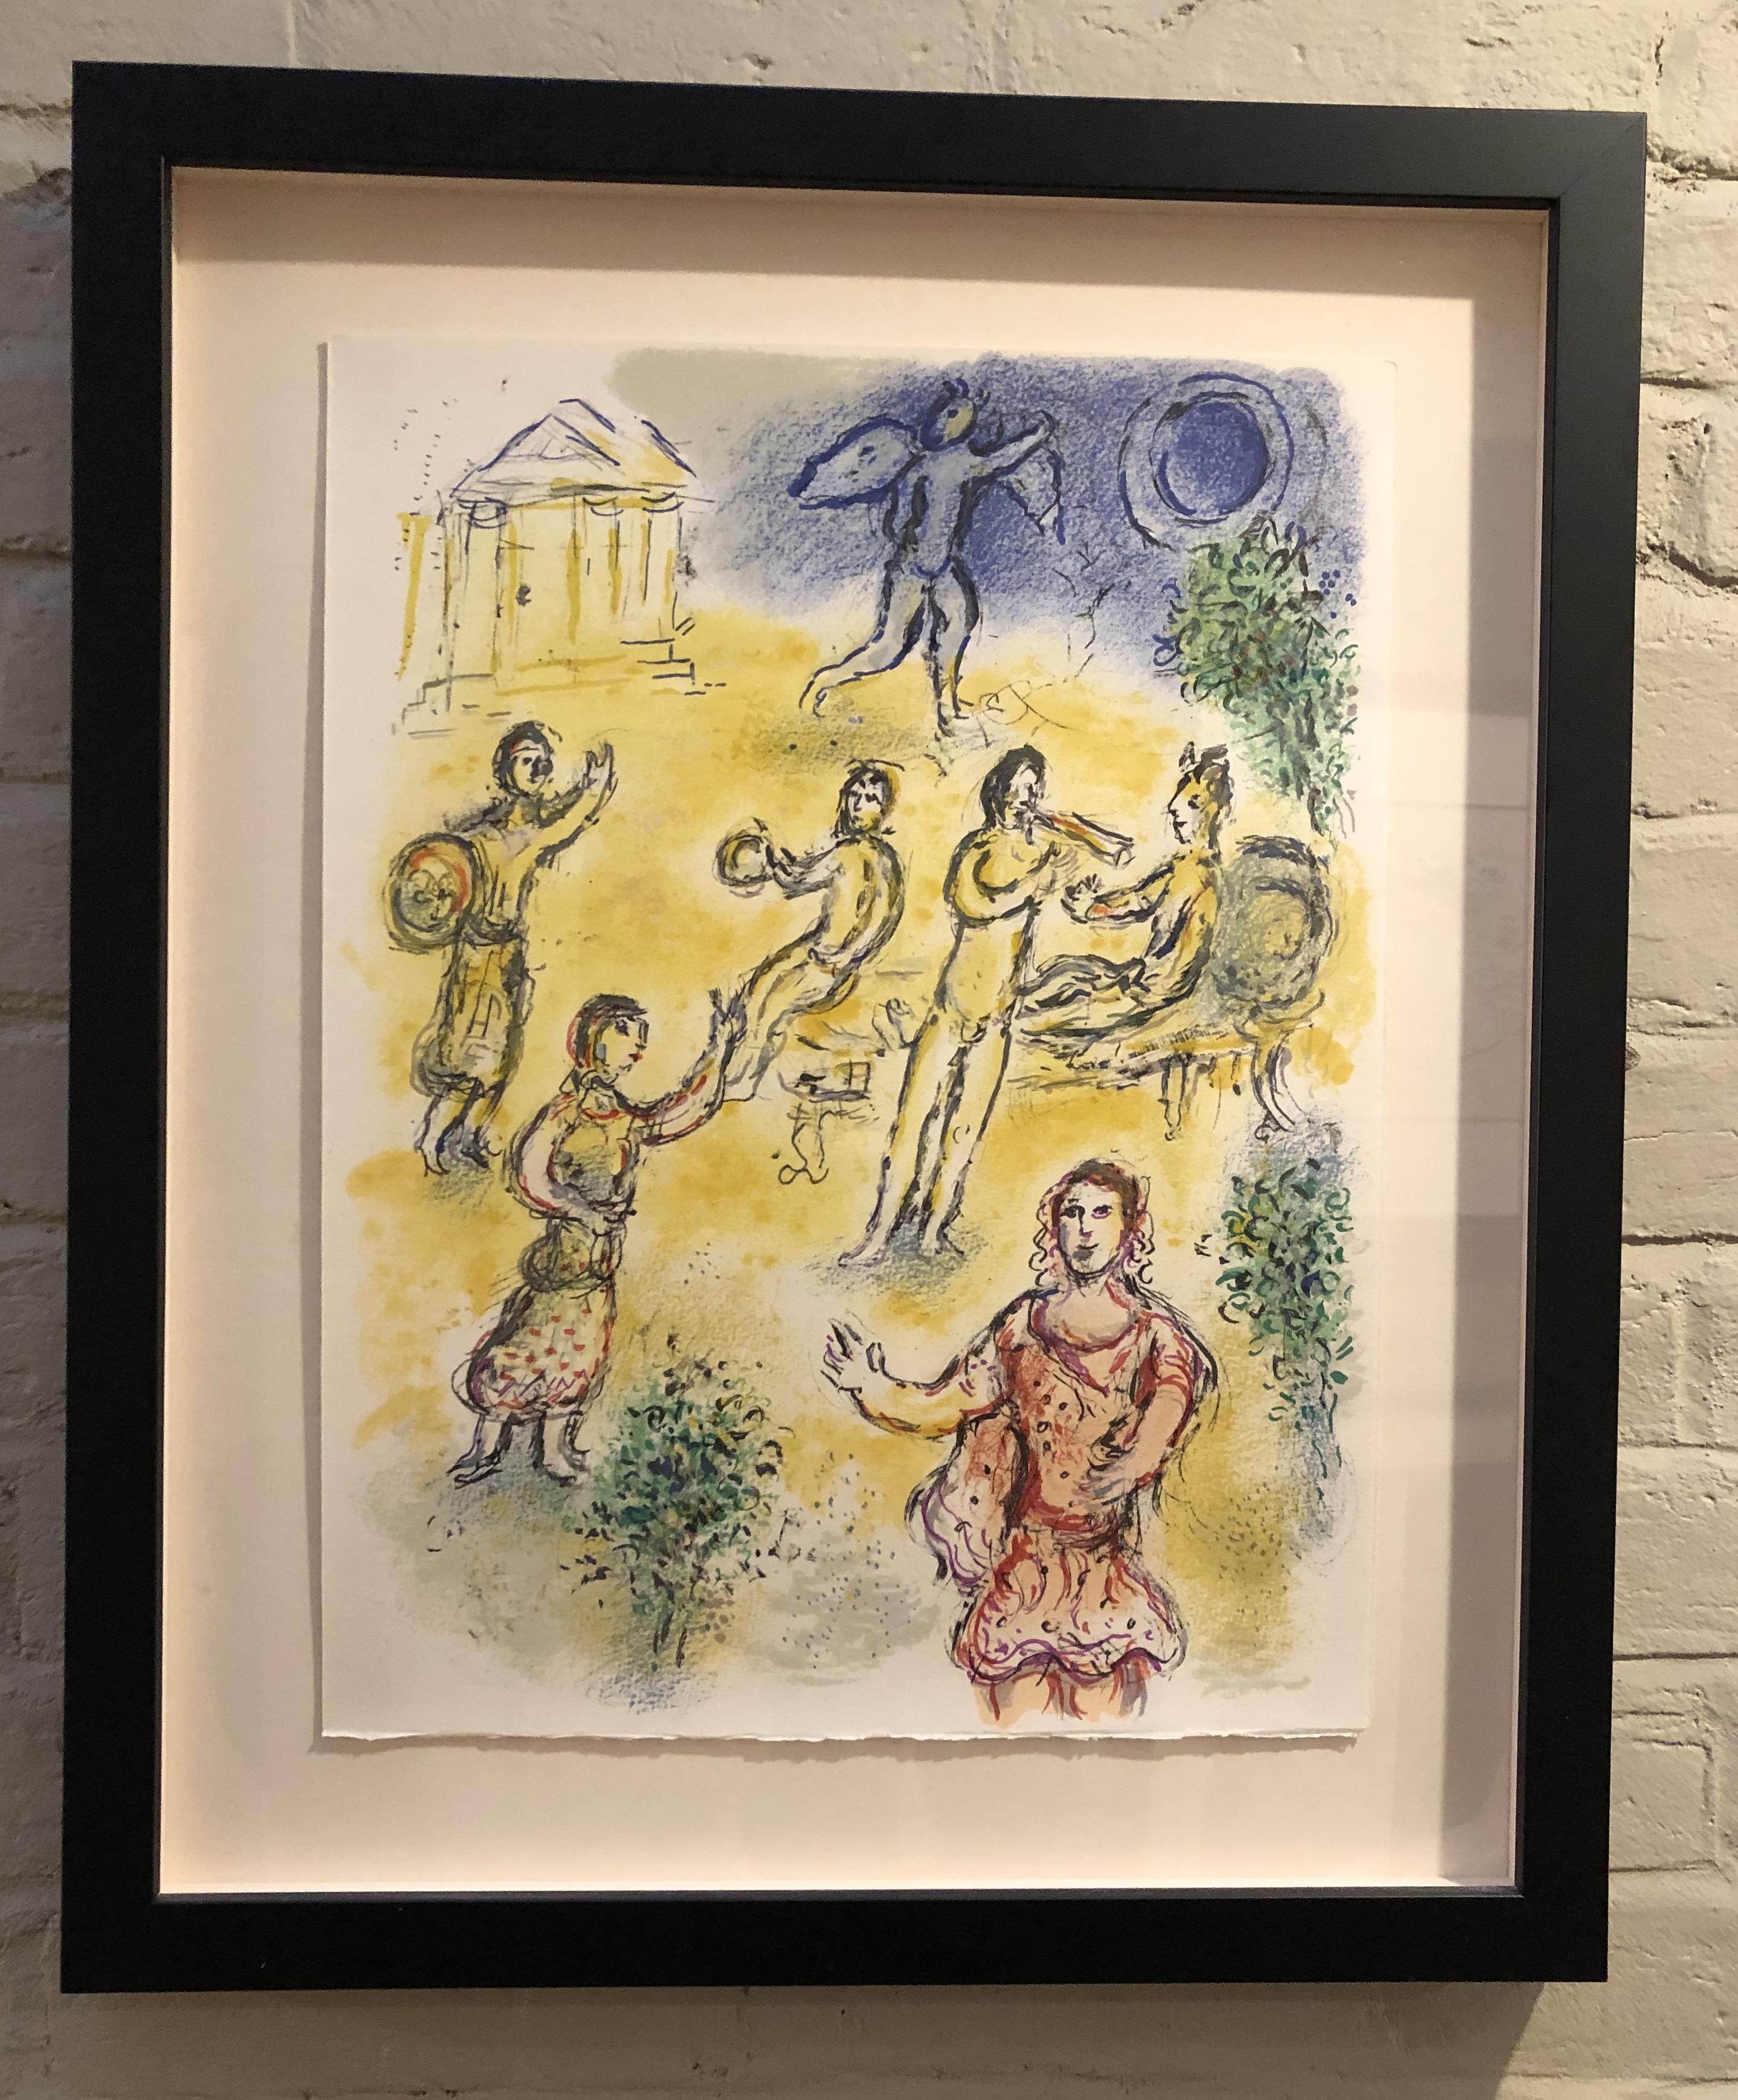 Banquet at the Palace of Menelaus - Print by Marc Chagall